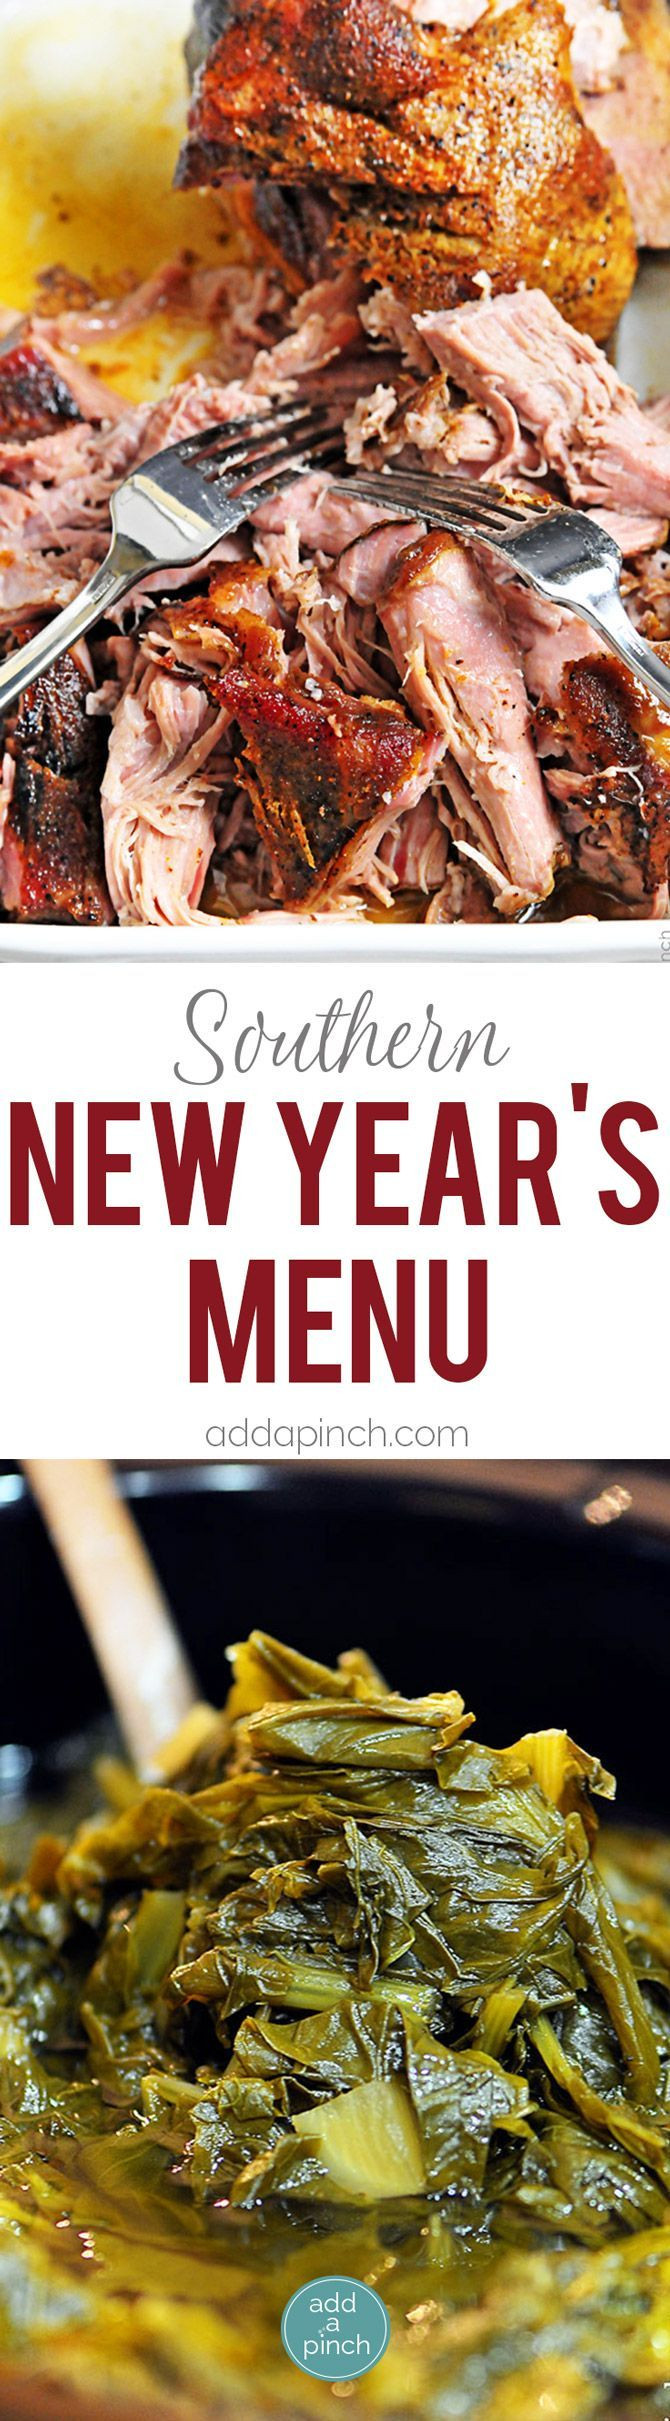 Traditional New Year'S Day Dinner
 Southern New Year s Menu perfect for celebrating the first